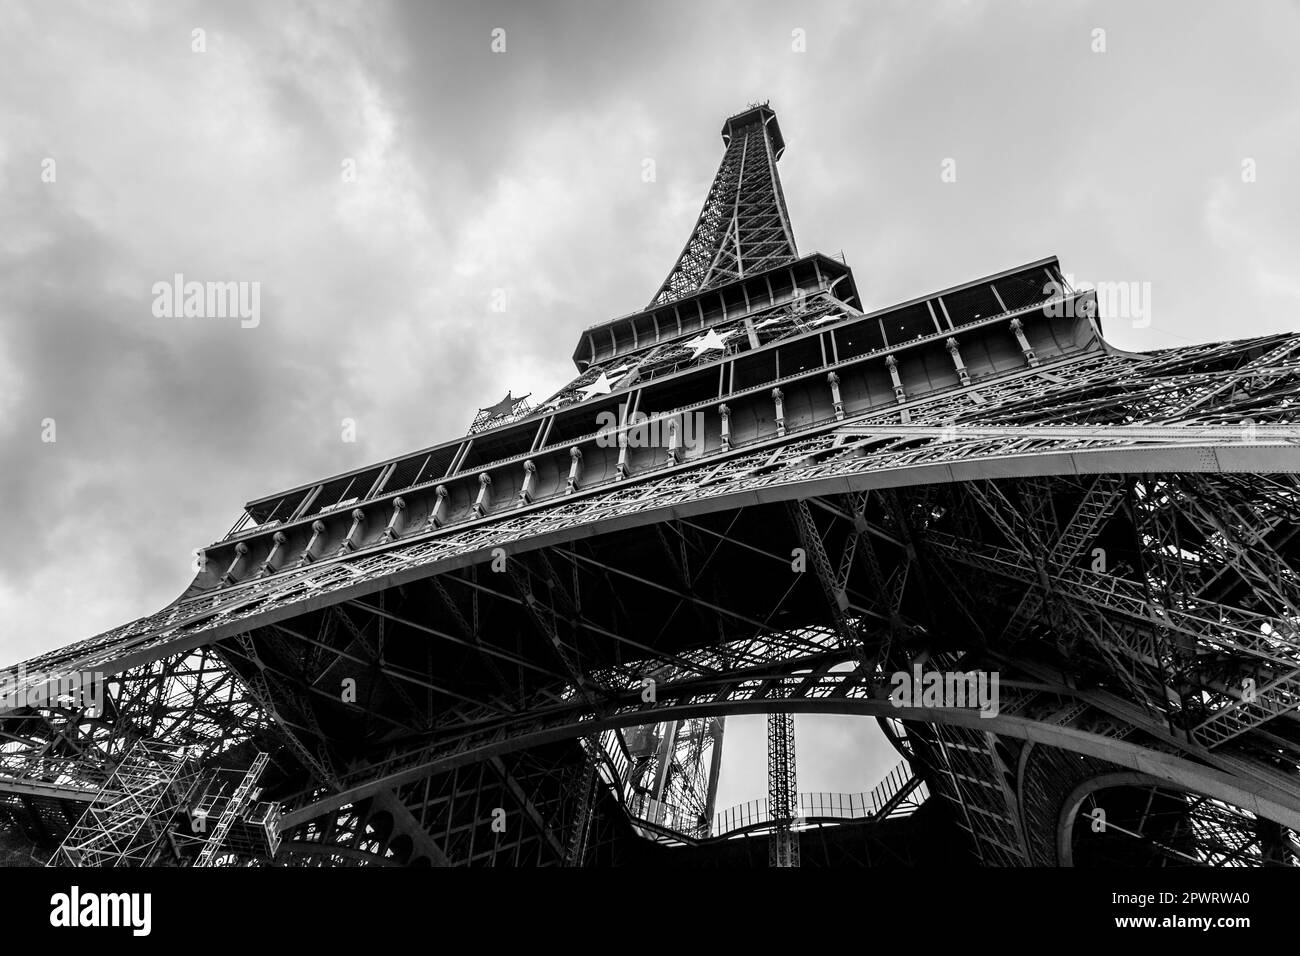 The iconic Eiffel Tower in a sunny winter day, wrought-iron lattice tower on the Champ de Mars in Paris, France. Stock Photo